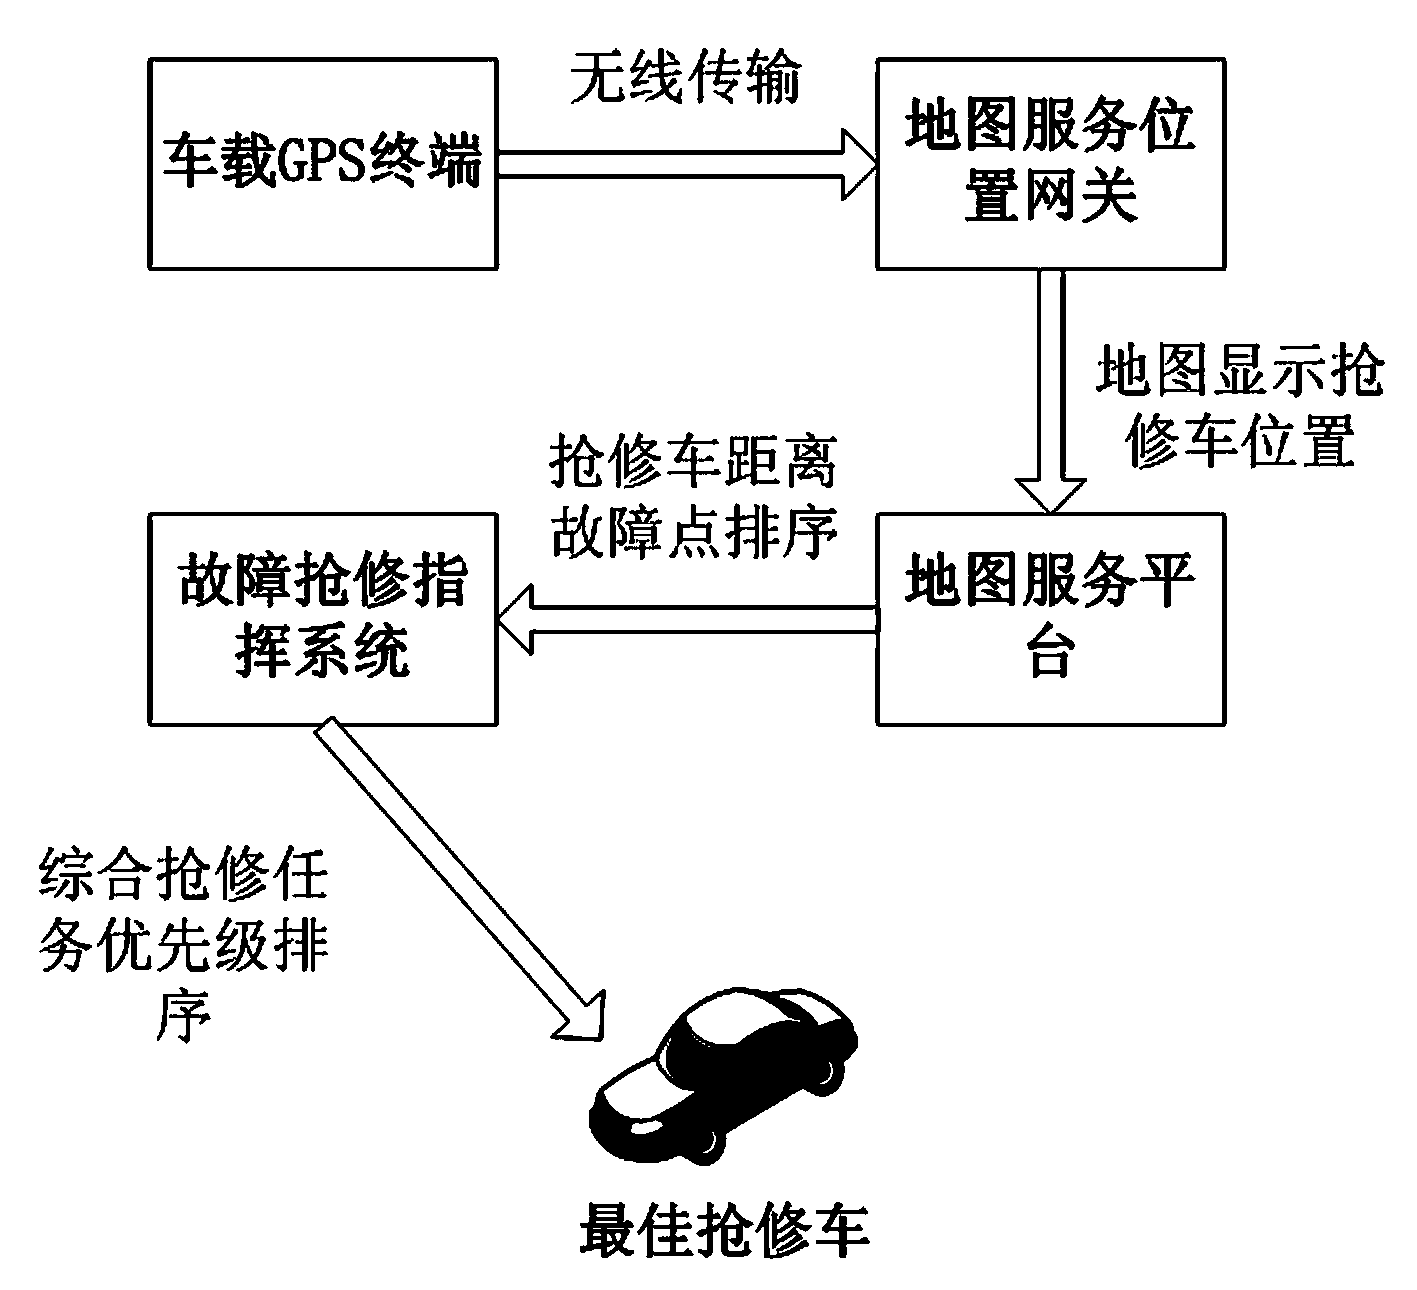 Power line repair commanding method based on CIS and movable operation